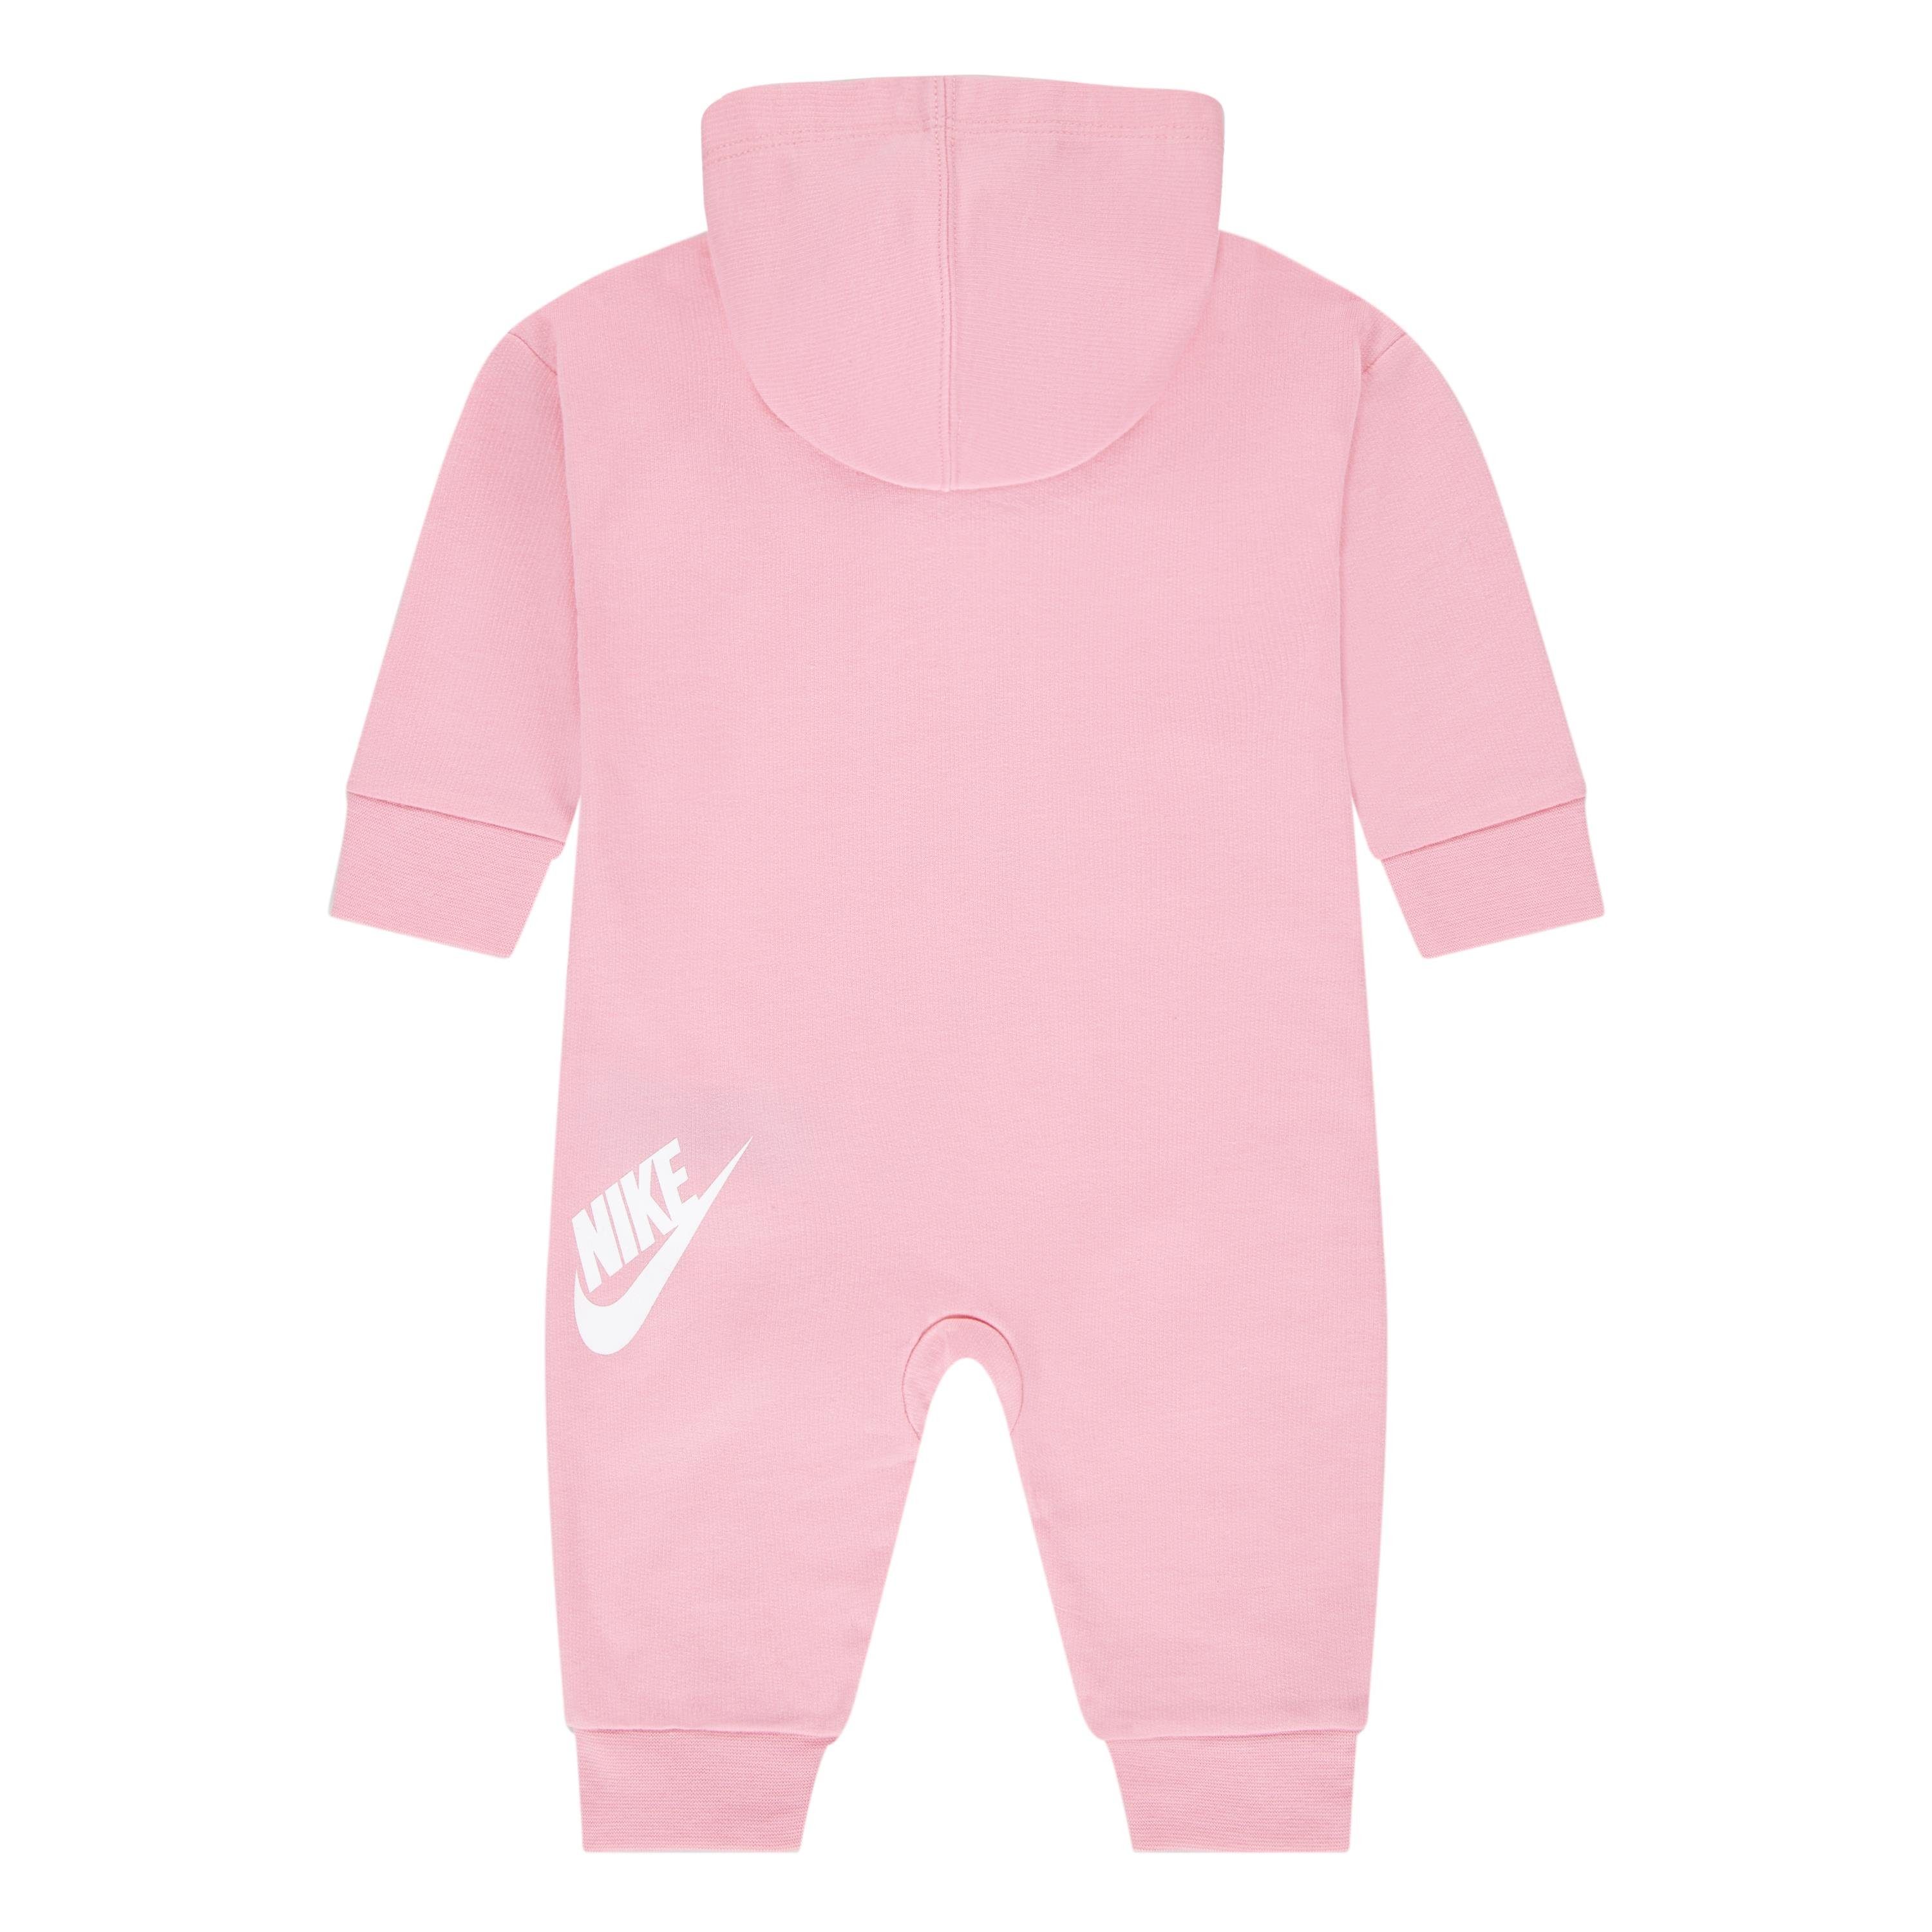 Nike Sportswear rosa-weiß COVERALL NKN ALL PLAY DAY Strampler